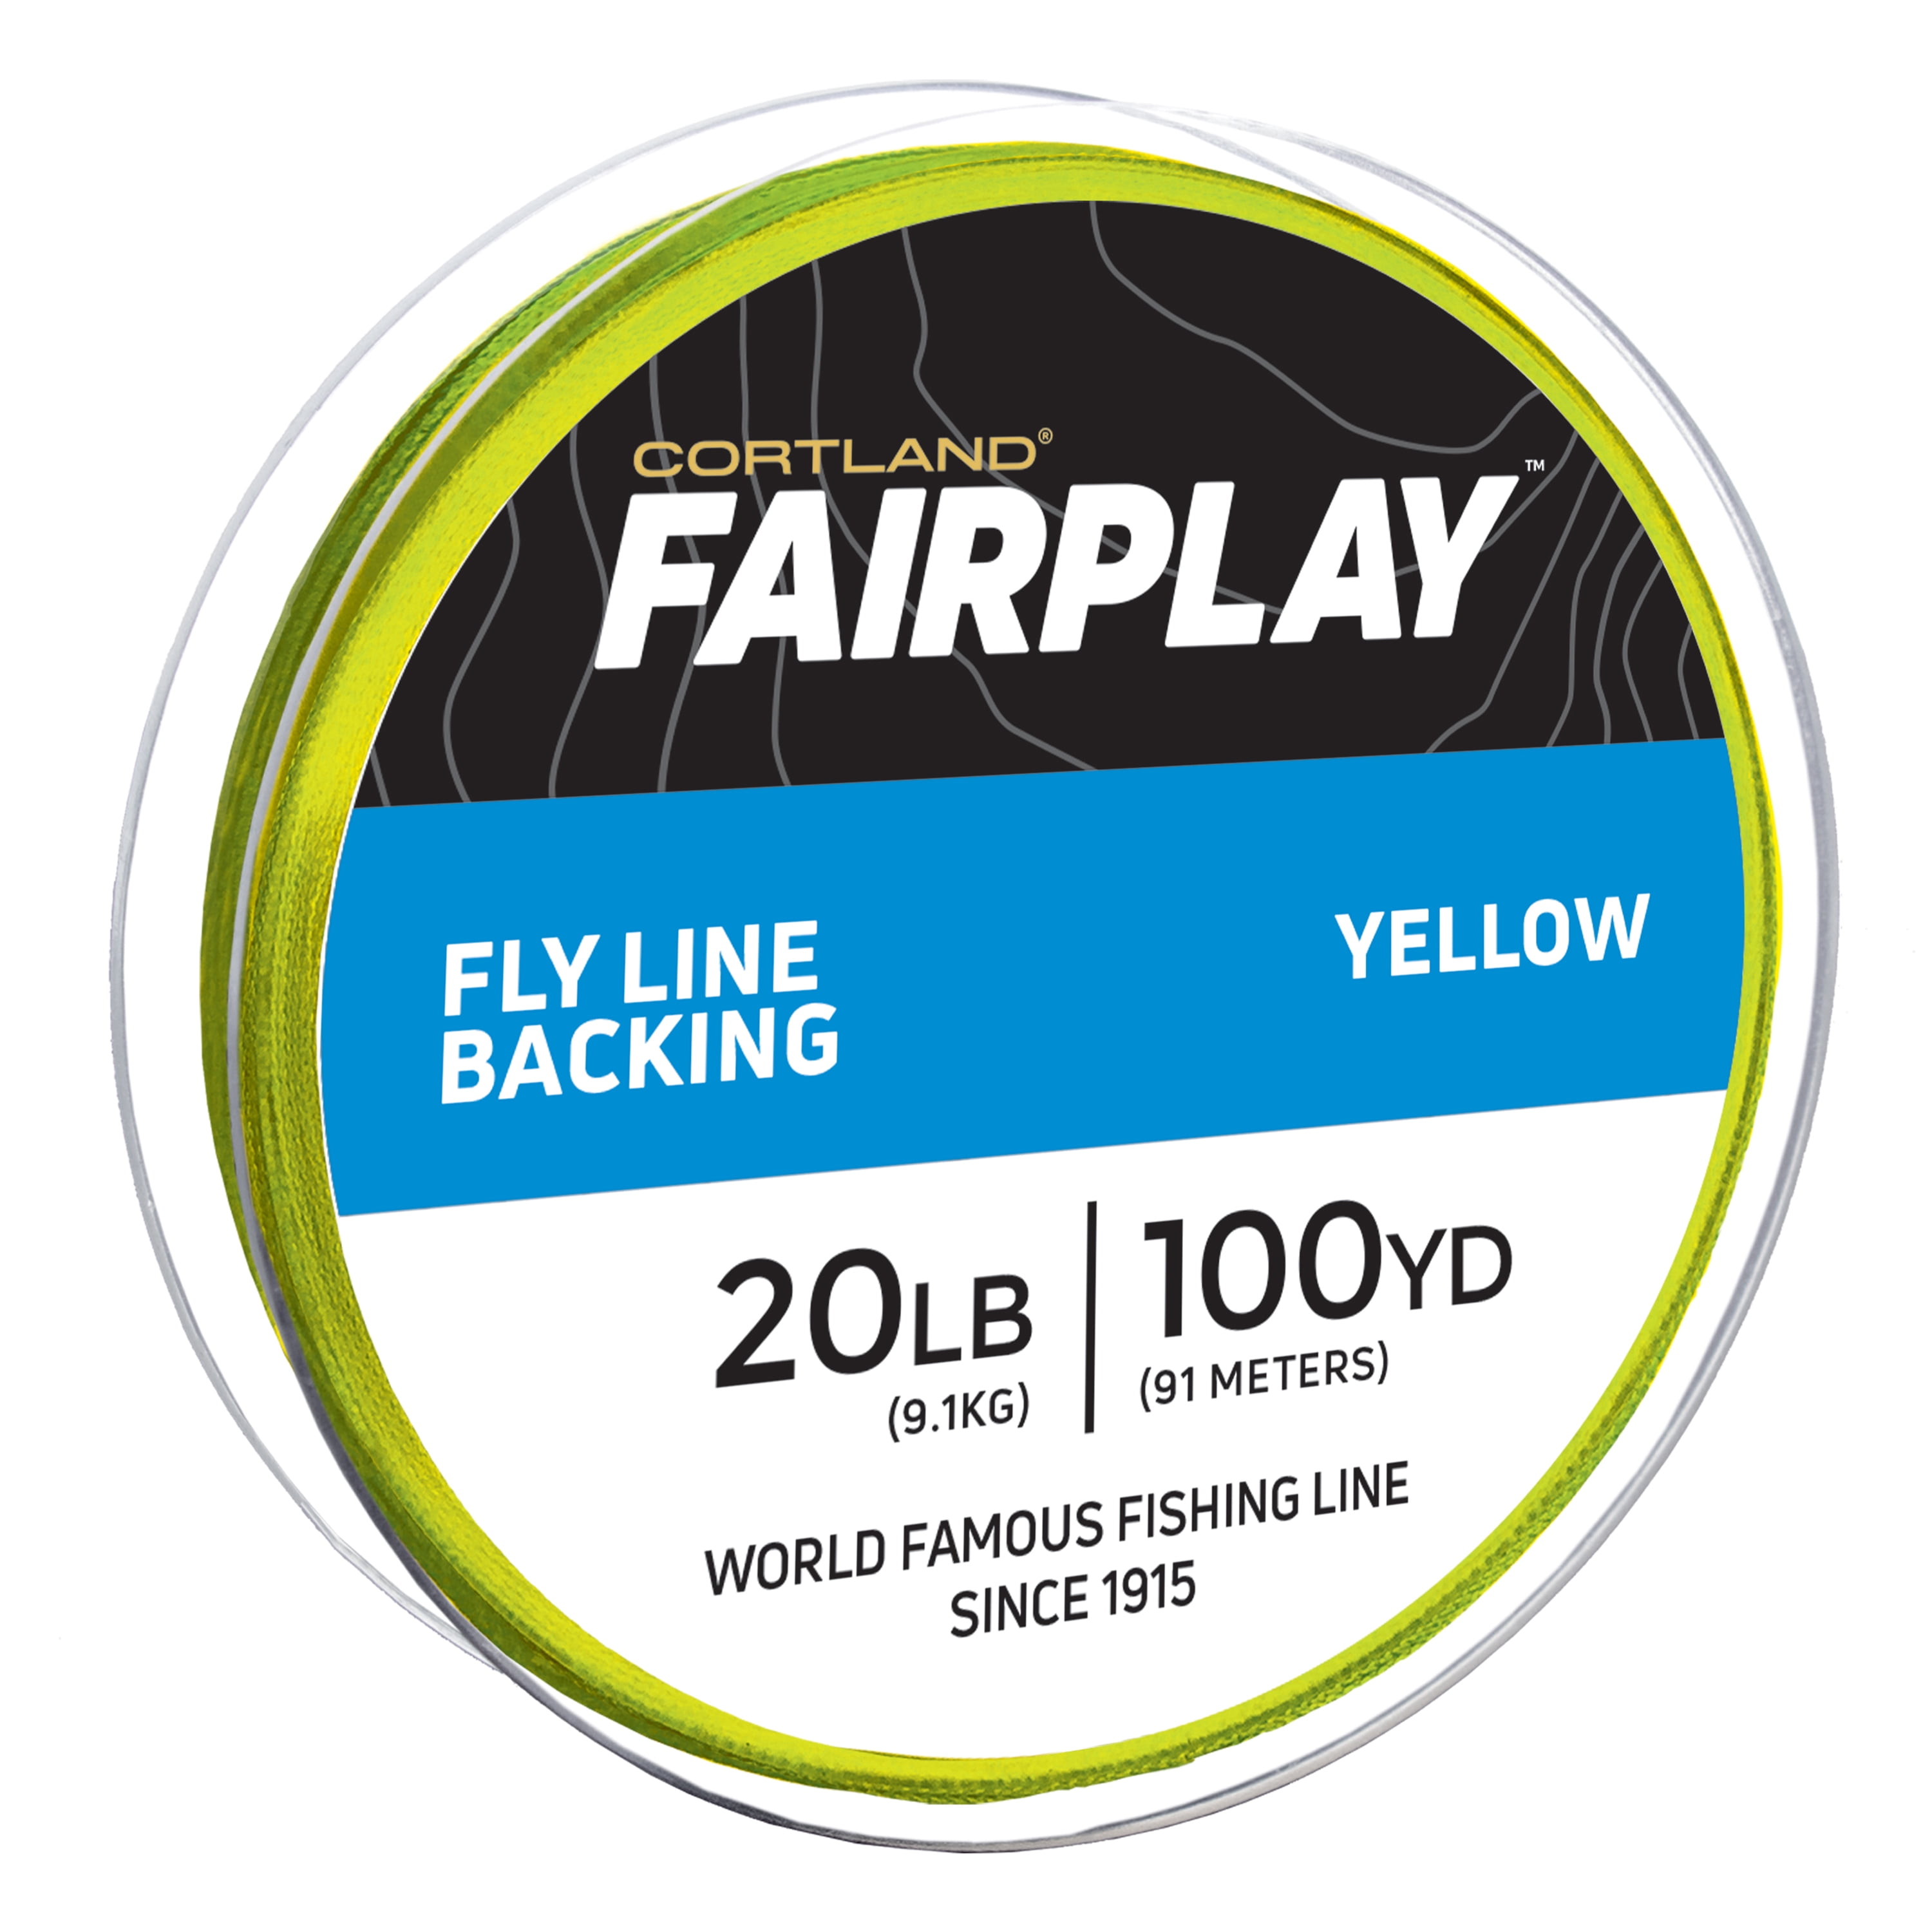 20 lbs 100 Yds Yellow Fly Line Backing Trout/Salmon Fishing